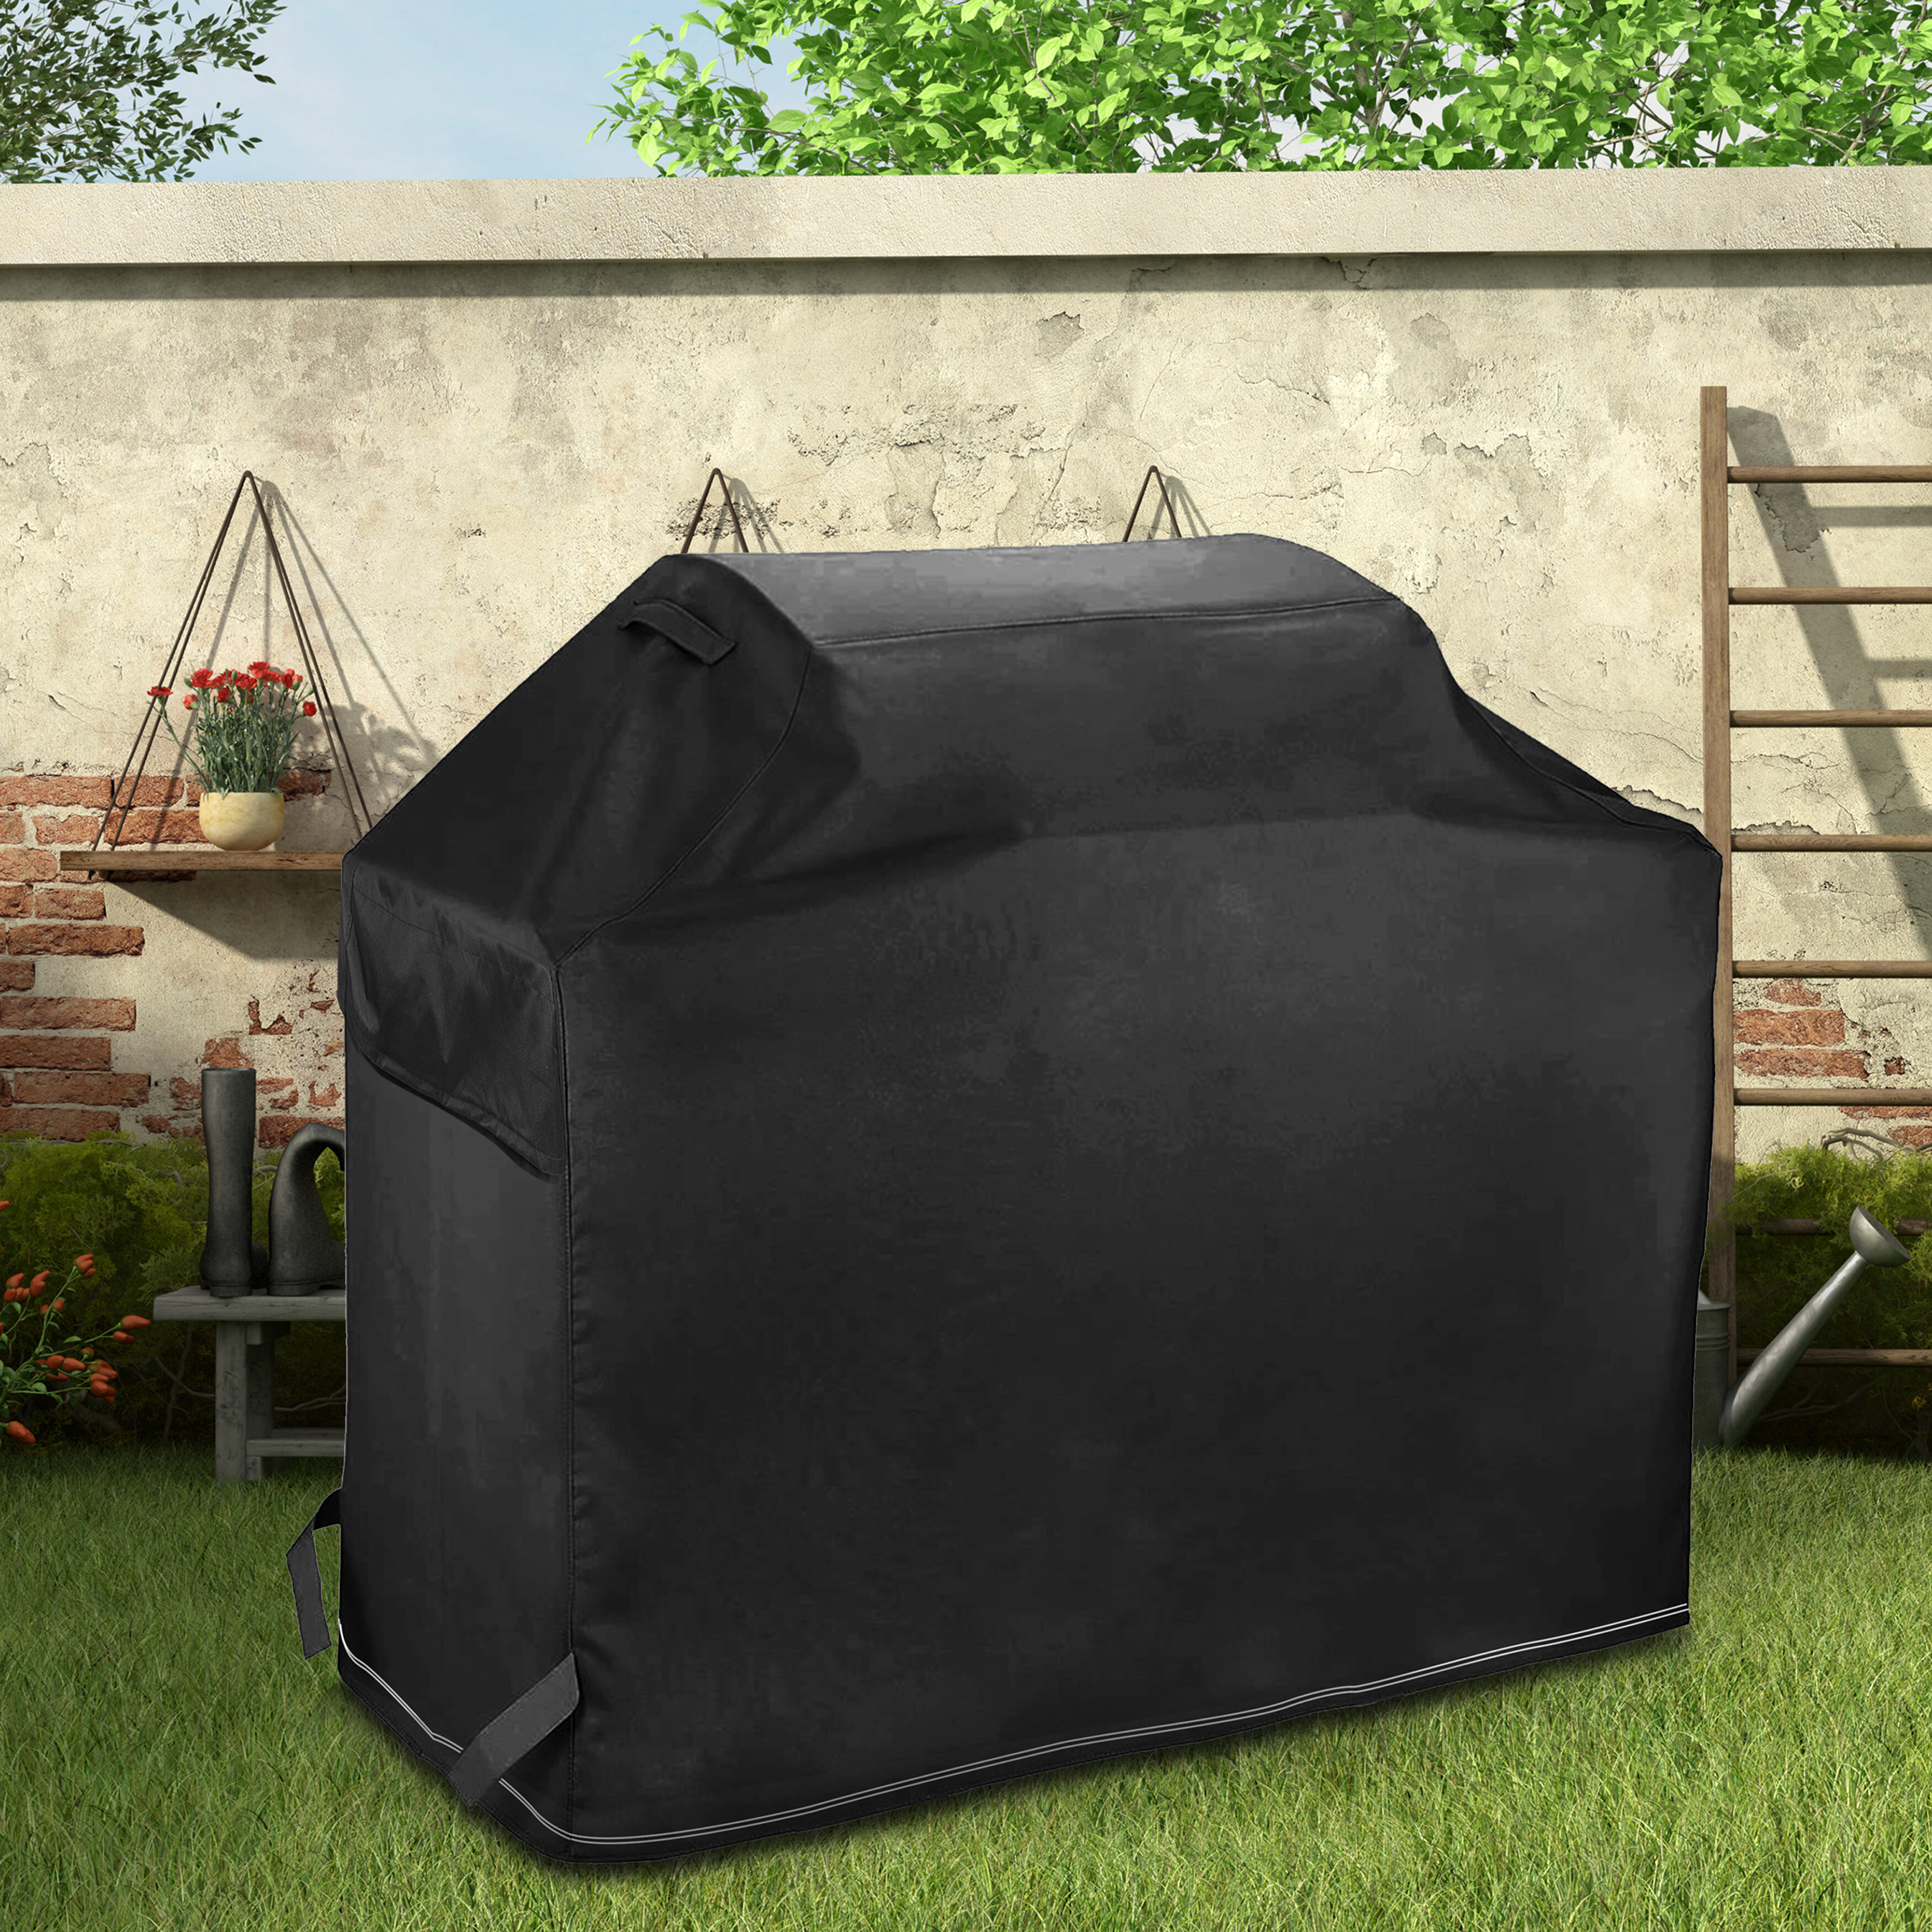 Barbecue Cover Fits up to 12" Wayfair